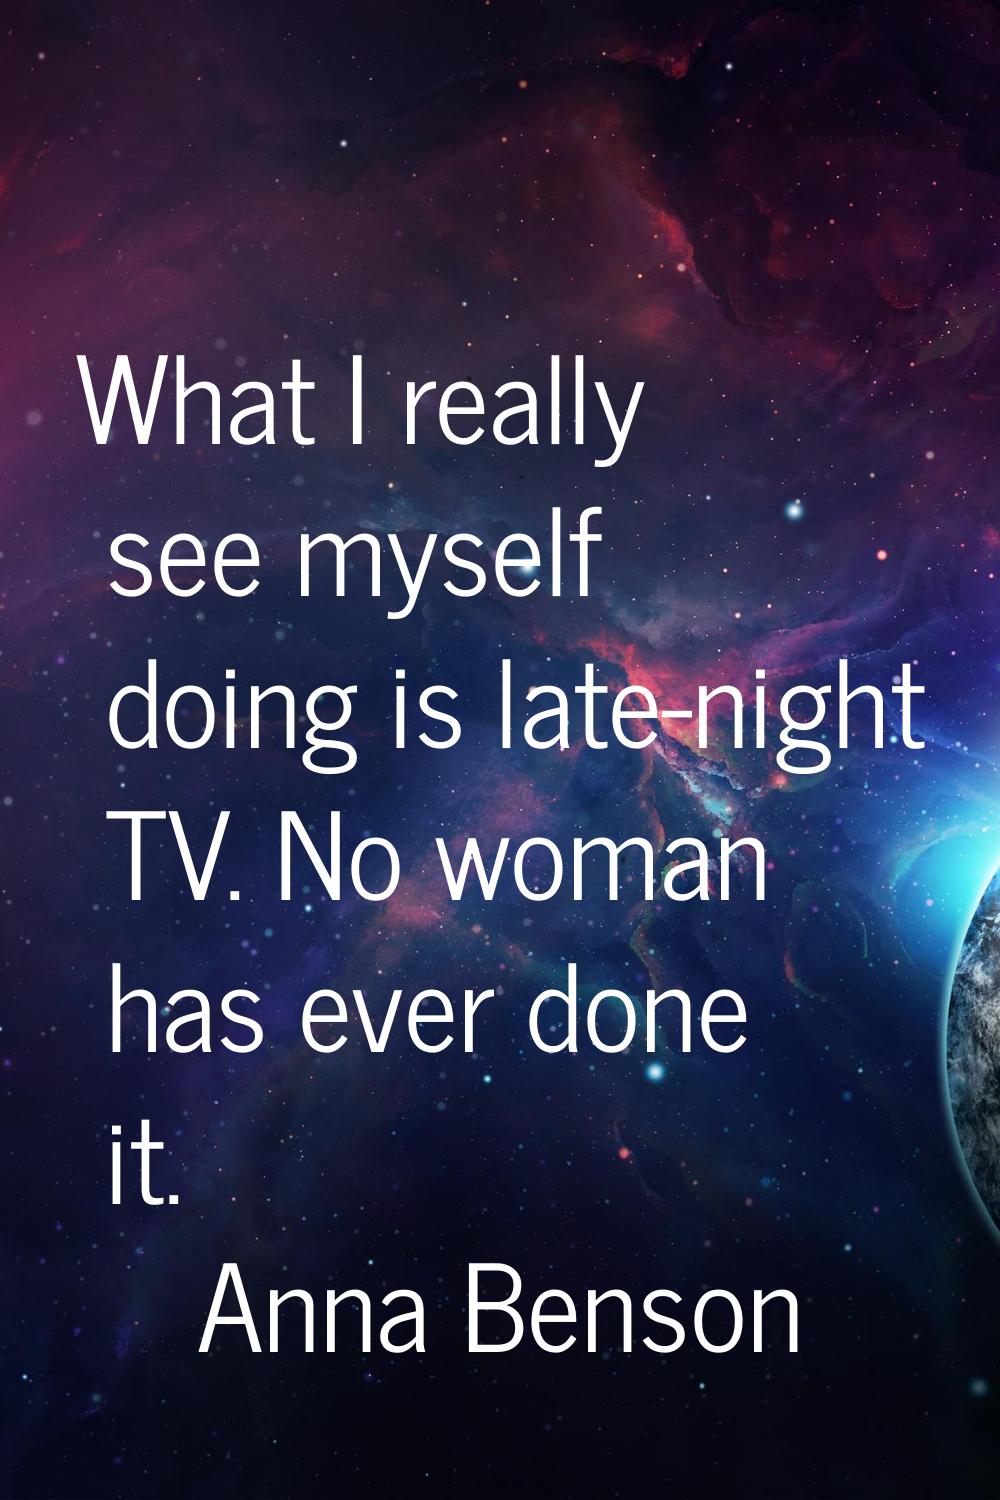 What I really see myself doing is late-night TV. No woman has ever done it.